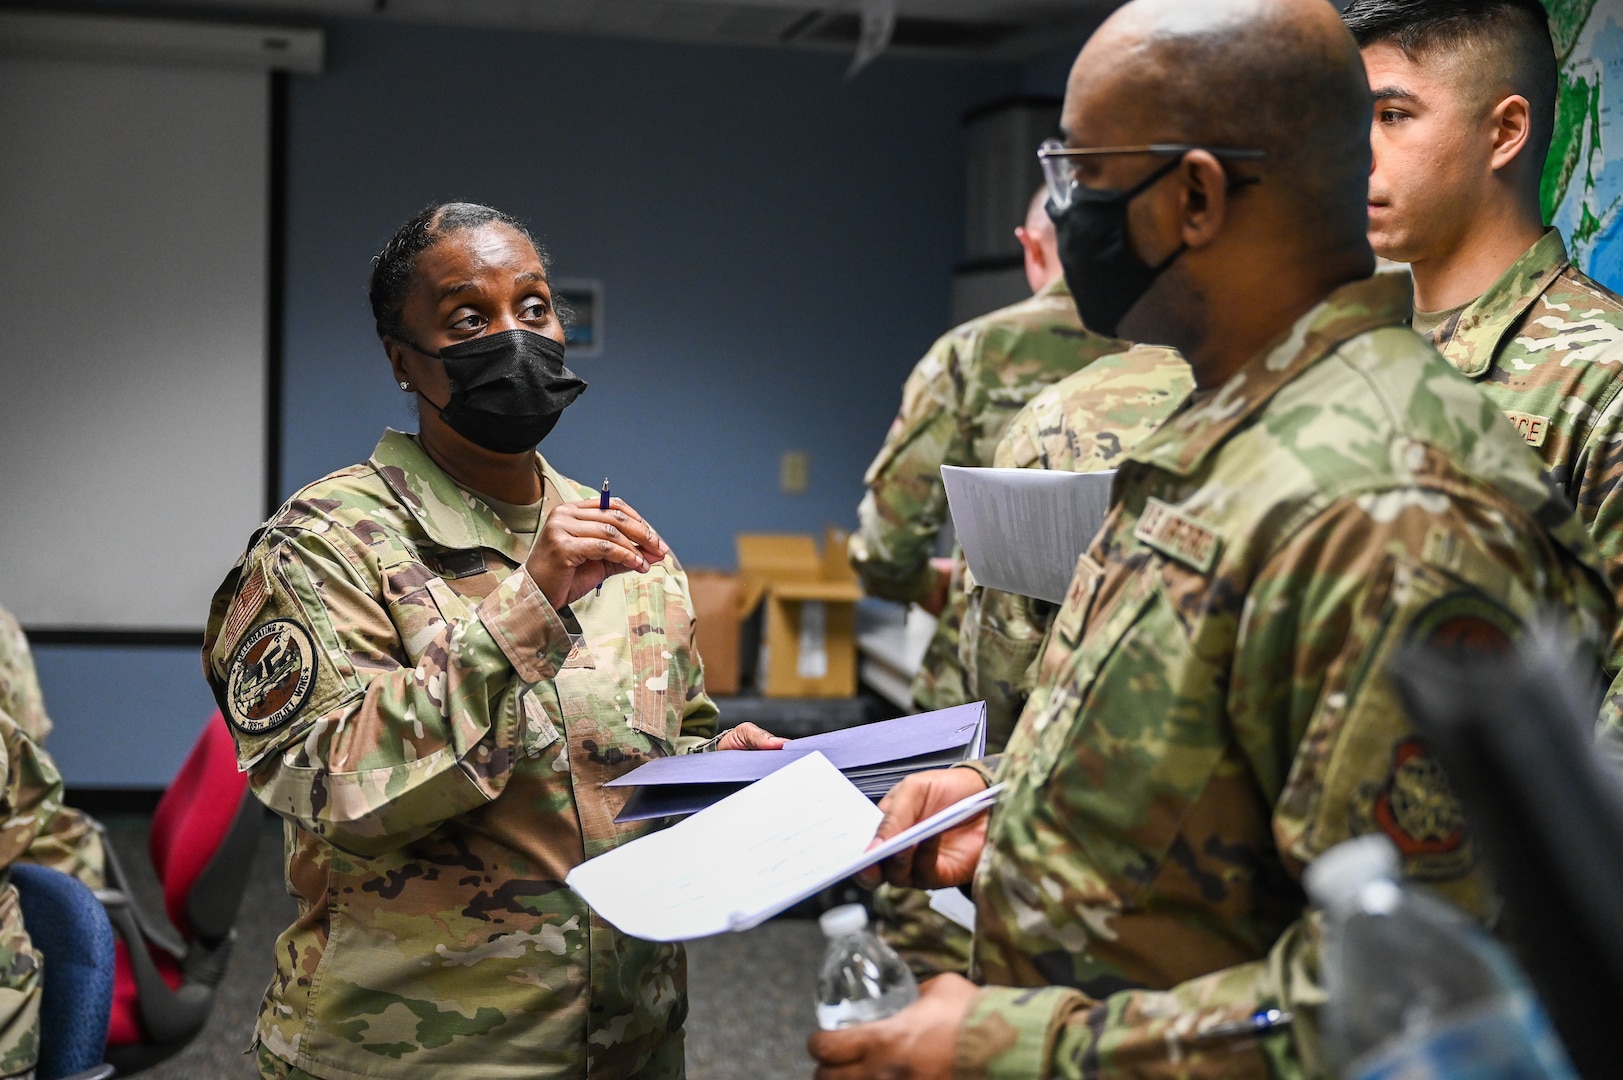 Thirty 165th Airlift Wing Airmen demobilized March 18, 2022, after serving more than 60 days spread out across Georgia. These multi-capable Airmen, all from different career fields, served at 15 COVID testing sites and 11 hospitals.